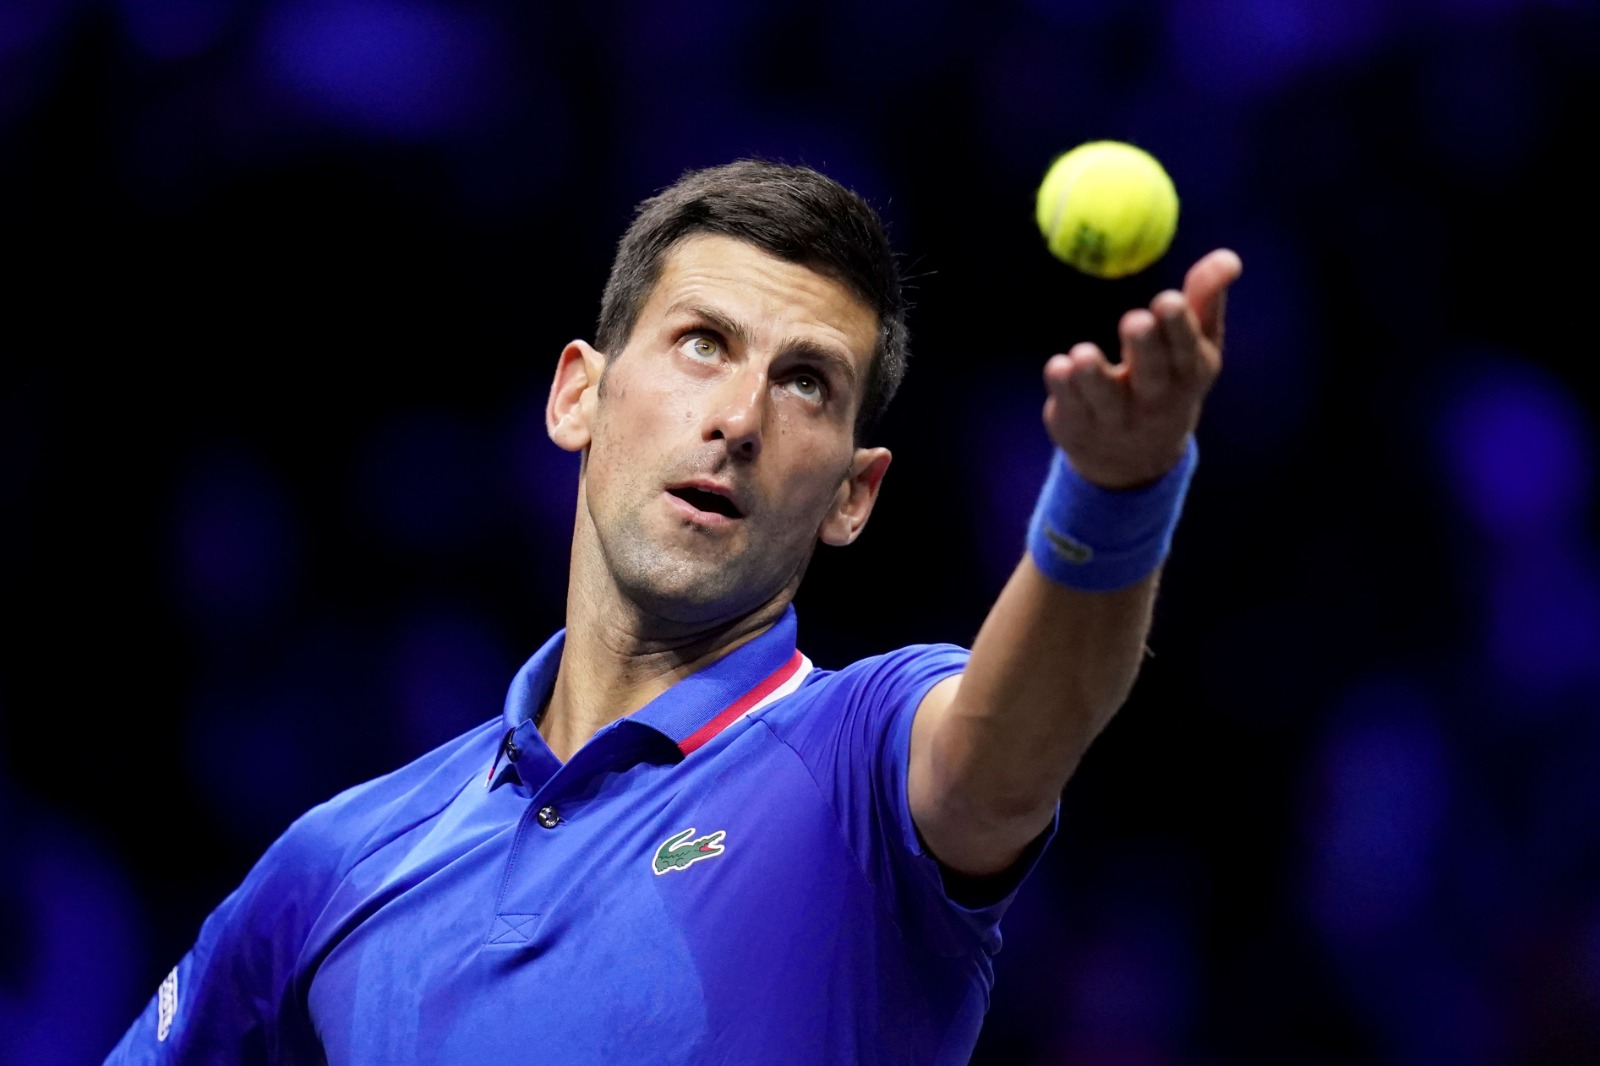 US Open 2023: Novak Djokovic sets sights on US Open return, says, 'I really want to be playing there', after missing Indian Wells Masters and Miami Open - Check Out 